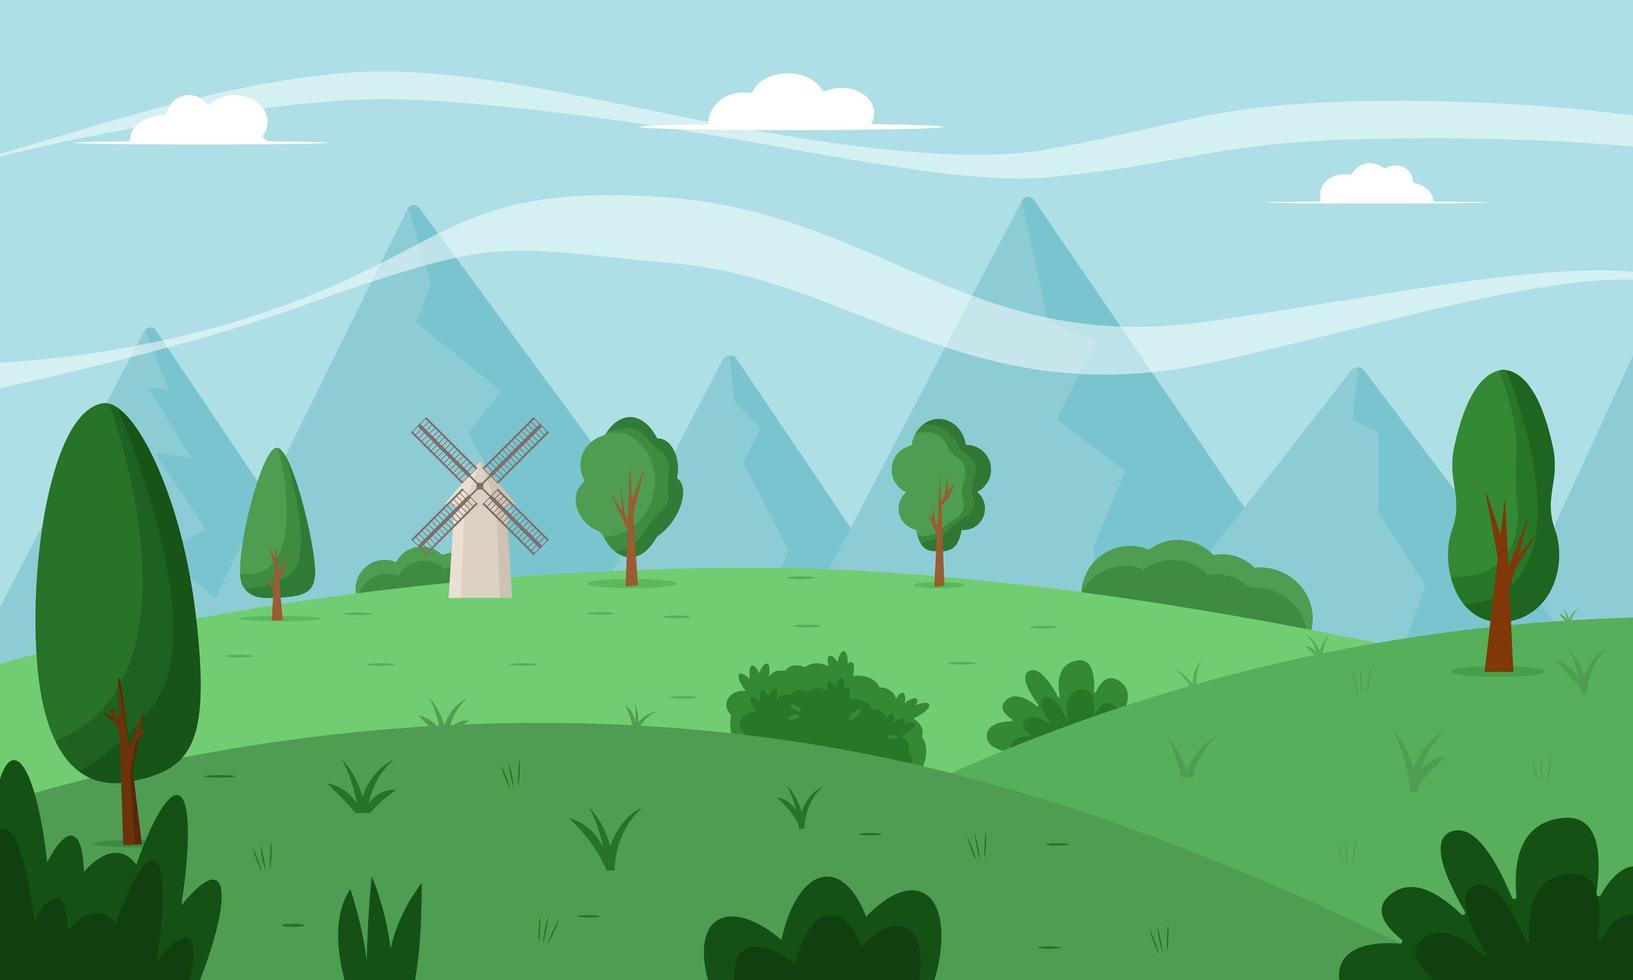 Spring landscape with trees, mountains, windmill, fields. Flat vector illustration